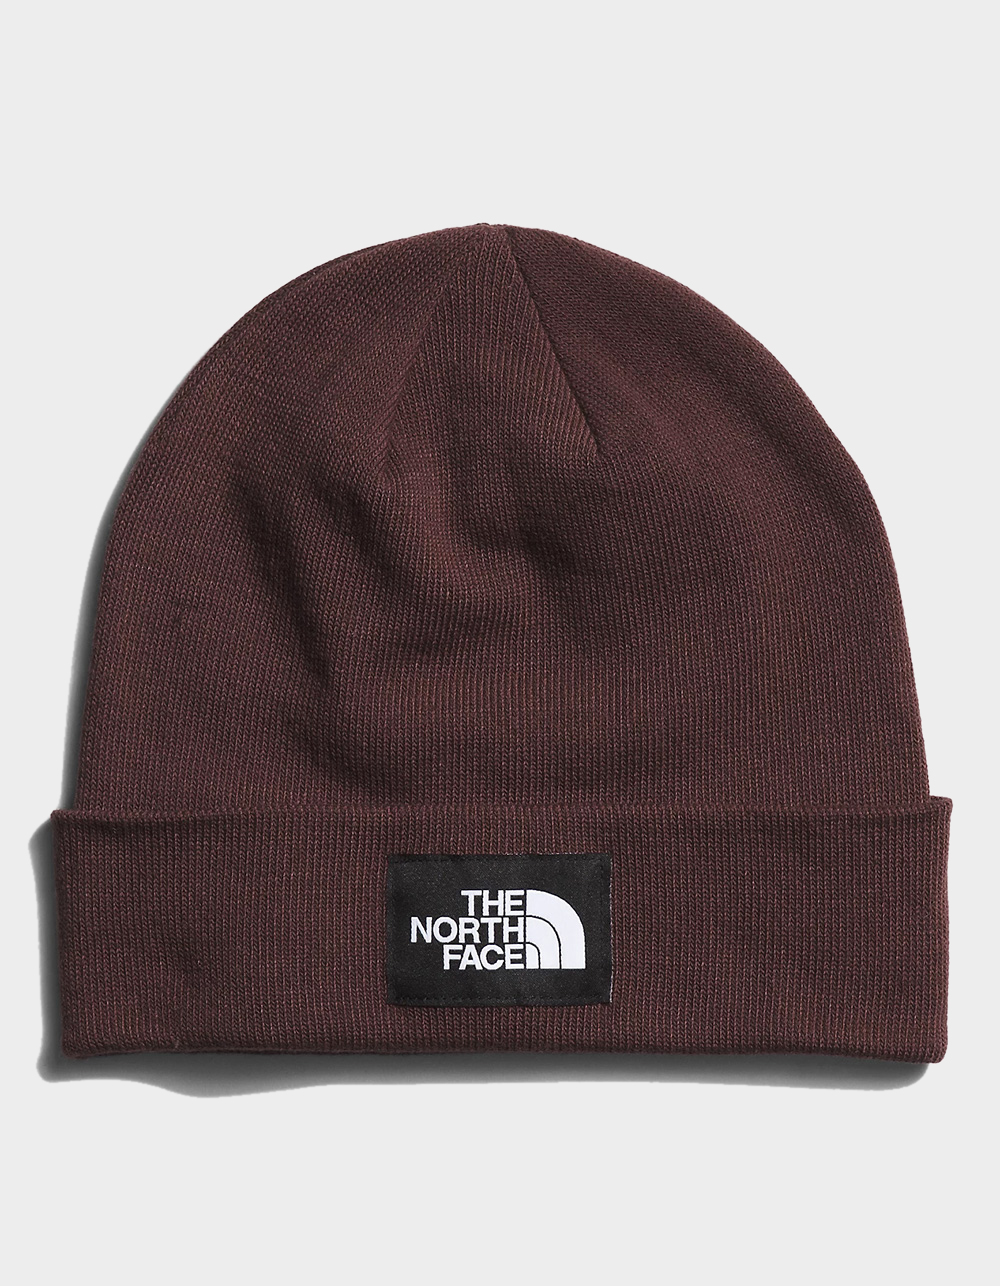 THE NORTH FACE Dock Worker Recycled Beanie